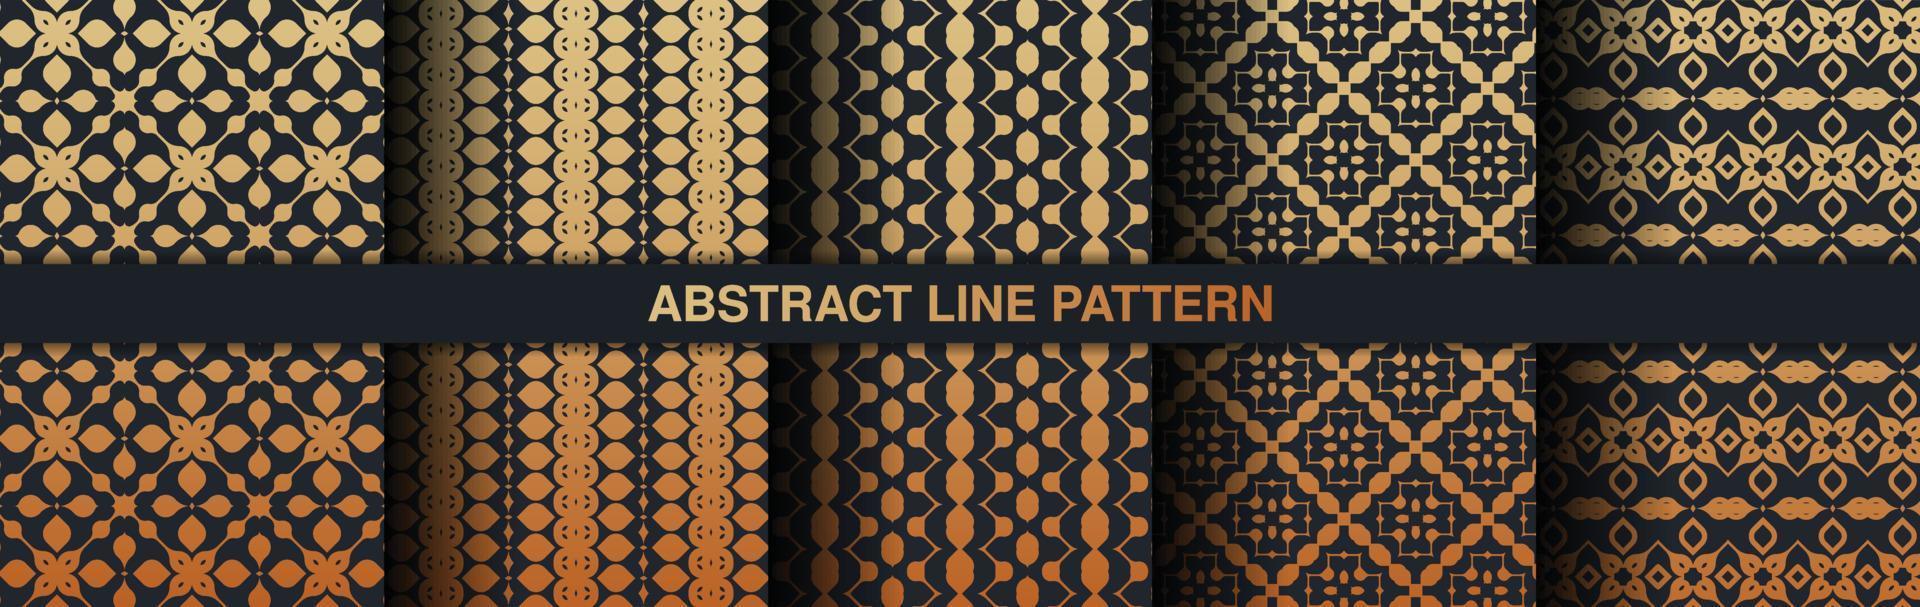 Collection gold and black seamless pattern background vector